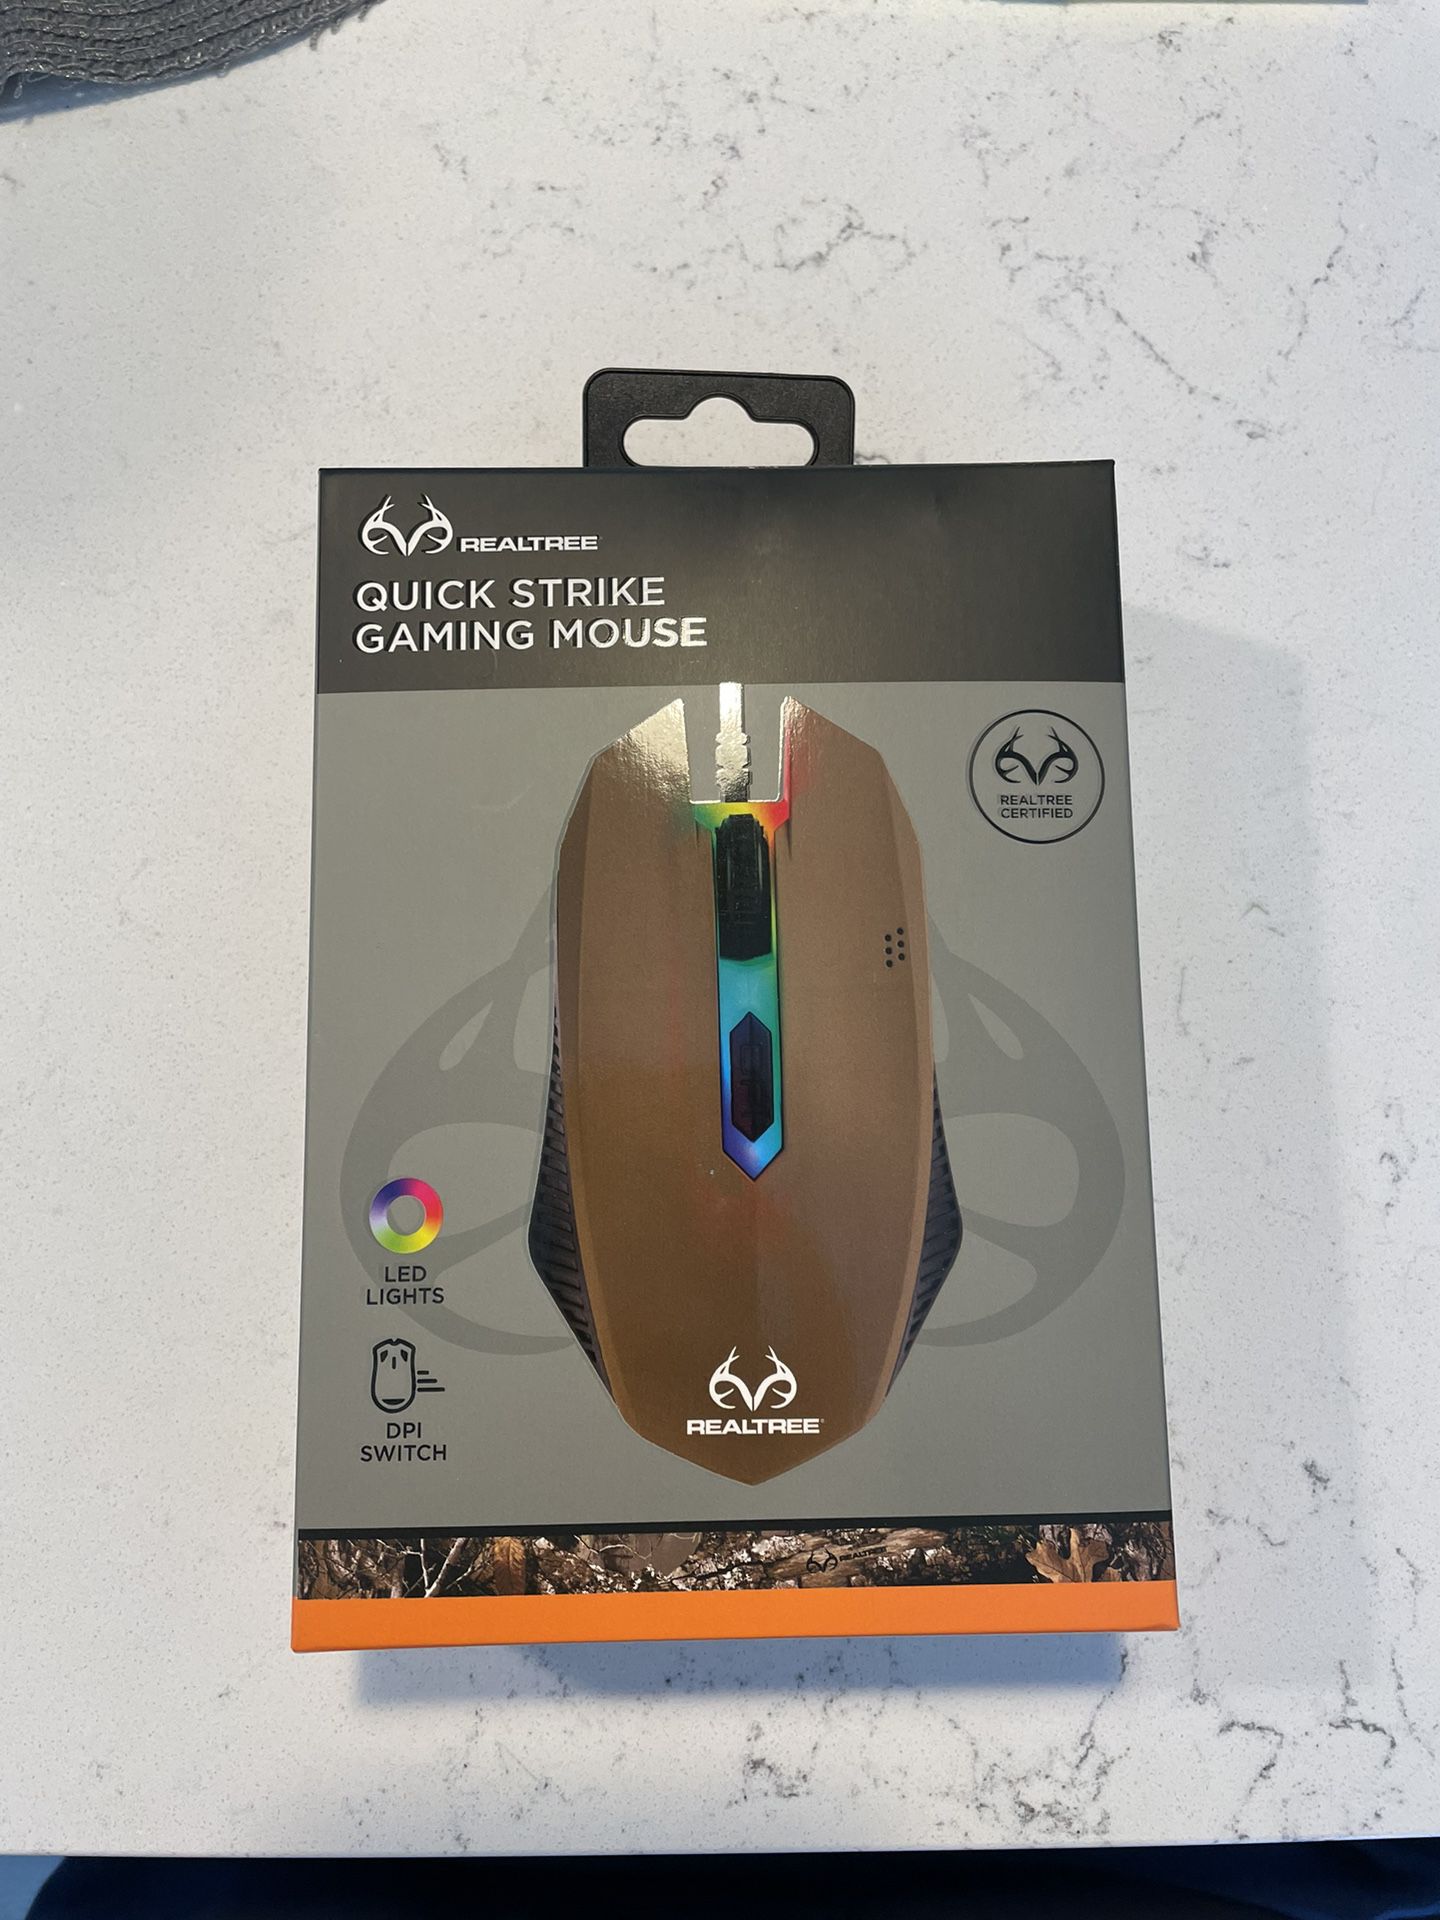 Realtree Quick Strike Gaming Mouse